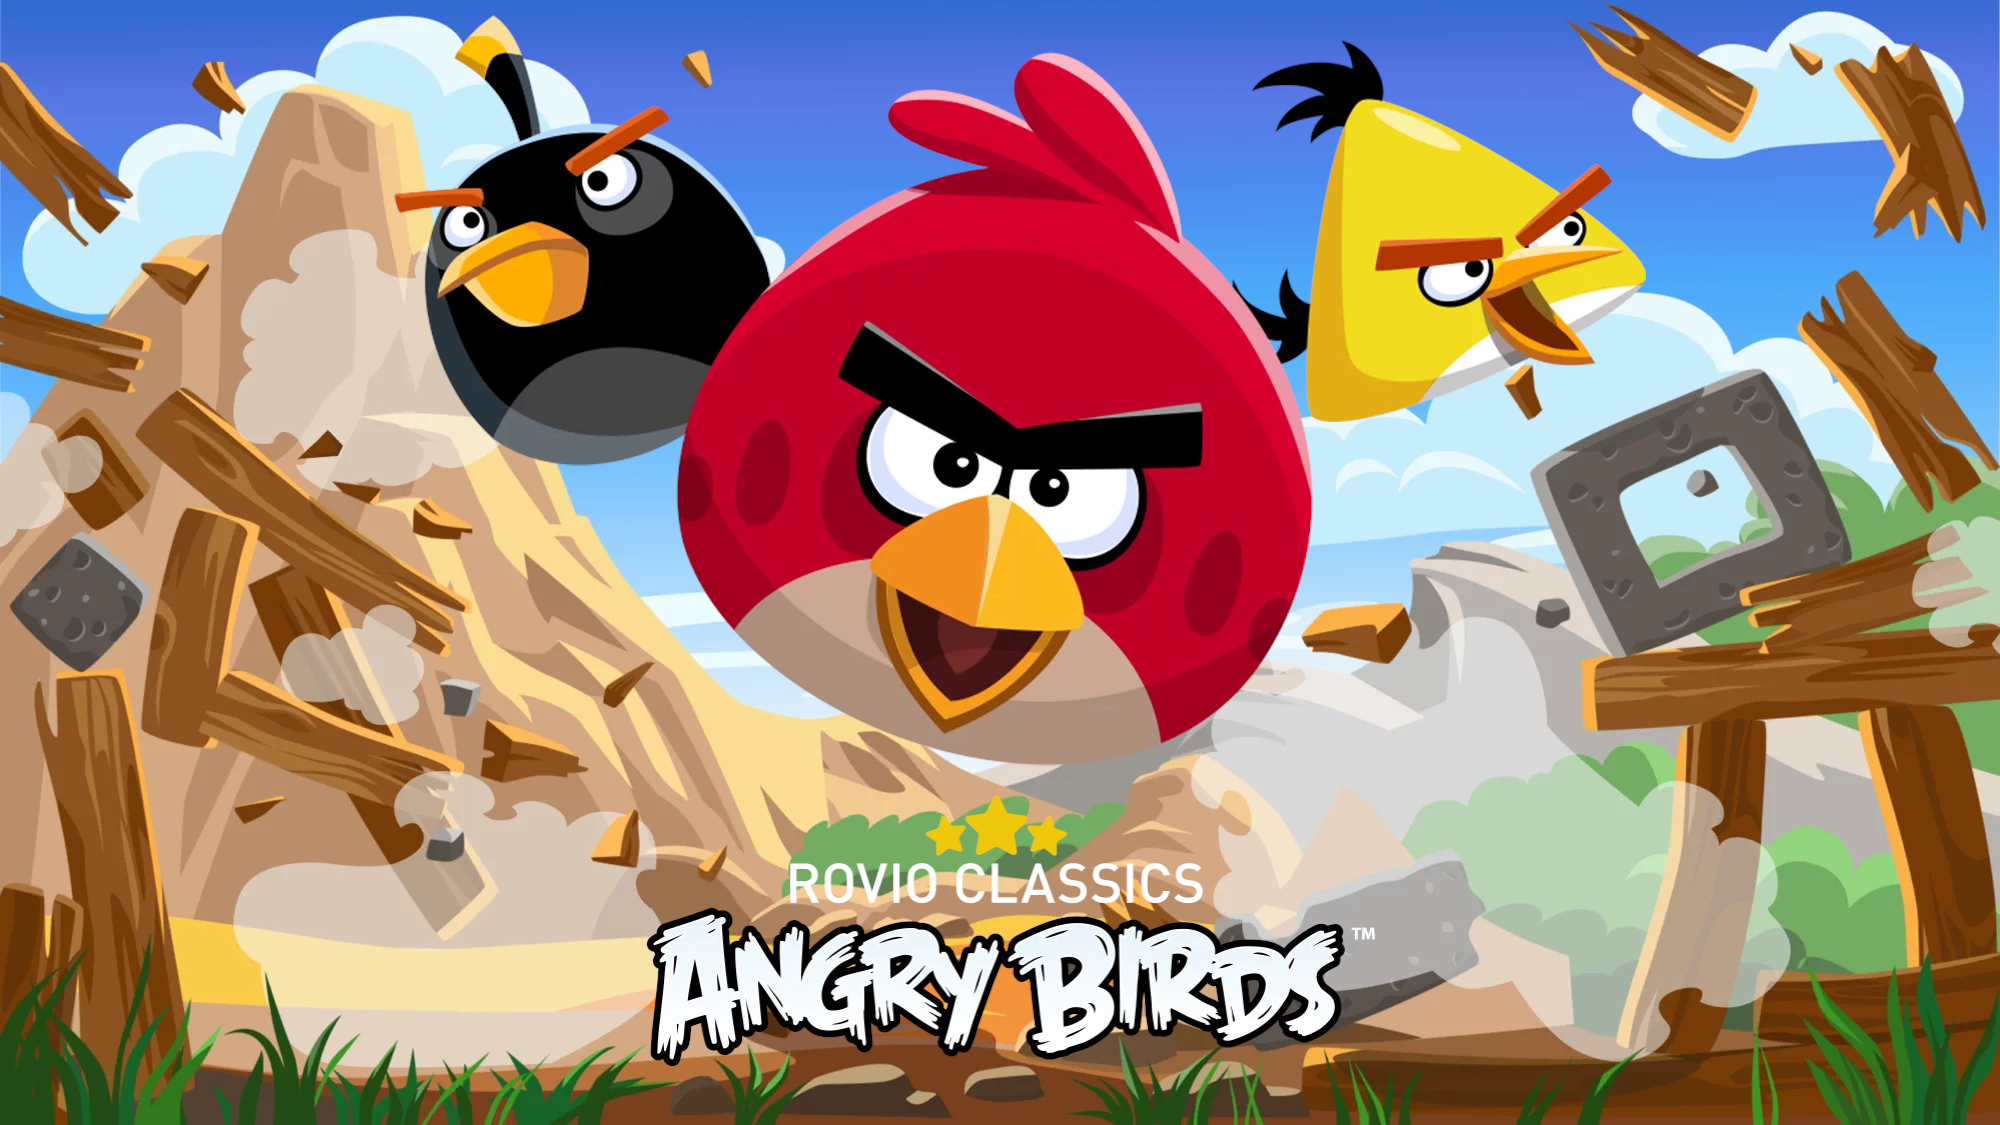 Image for Rovio delists original Angry Birds due to impact on free-to-play games